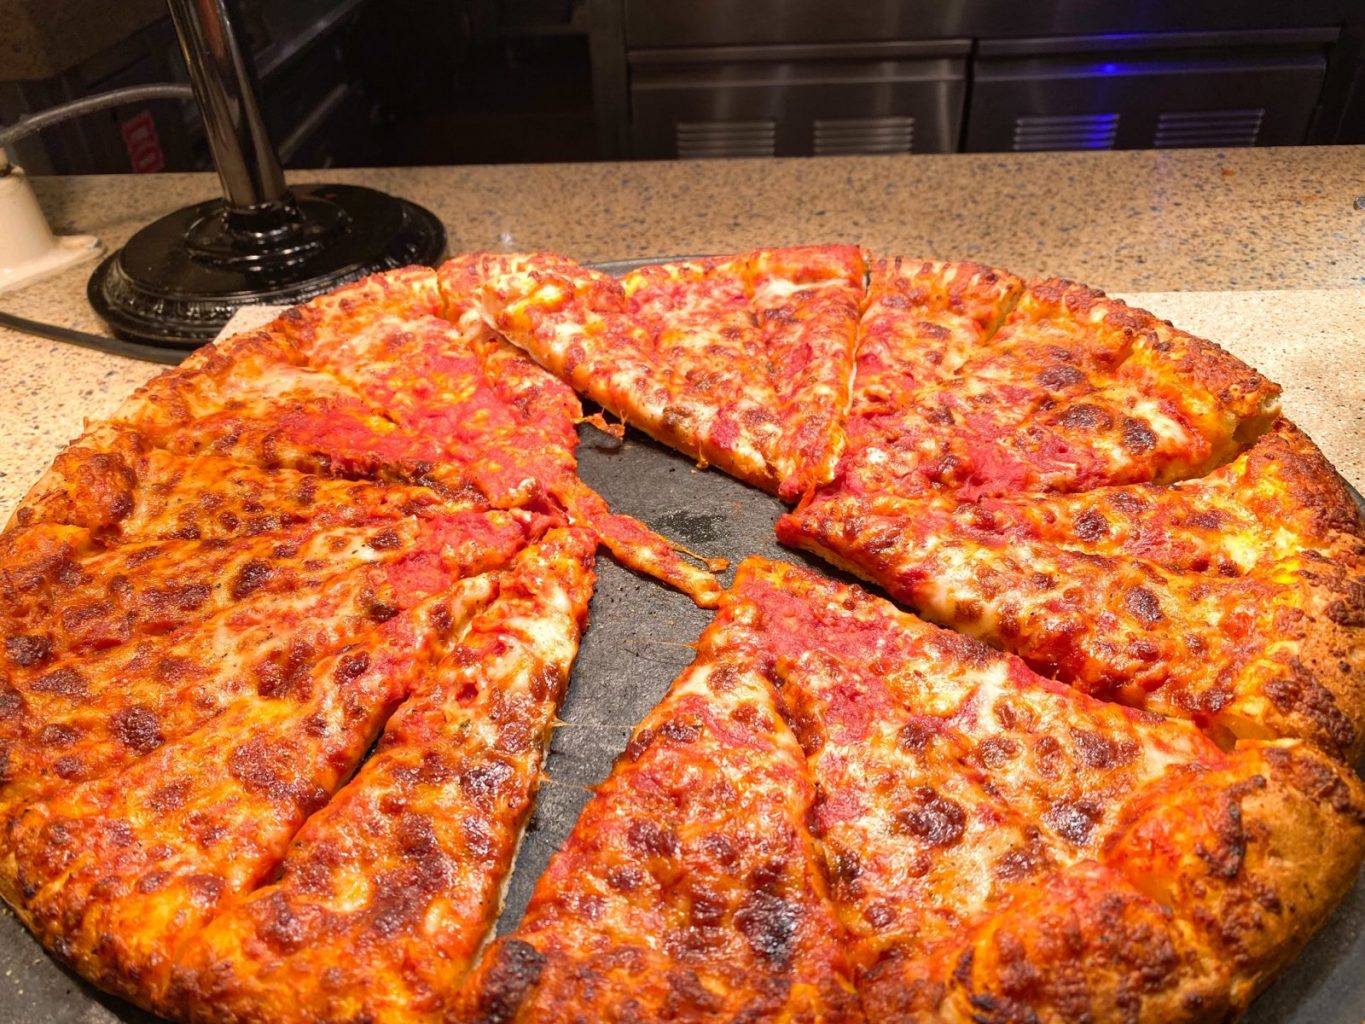 Cape May offering of the best pizza at Disney